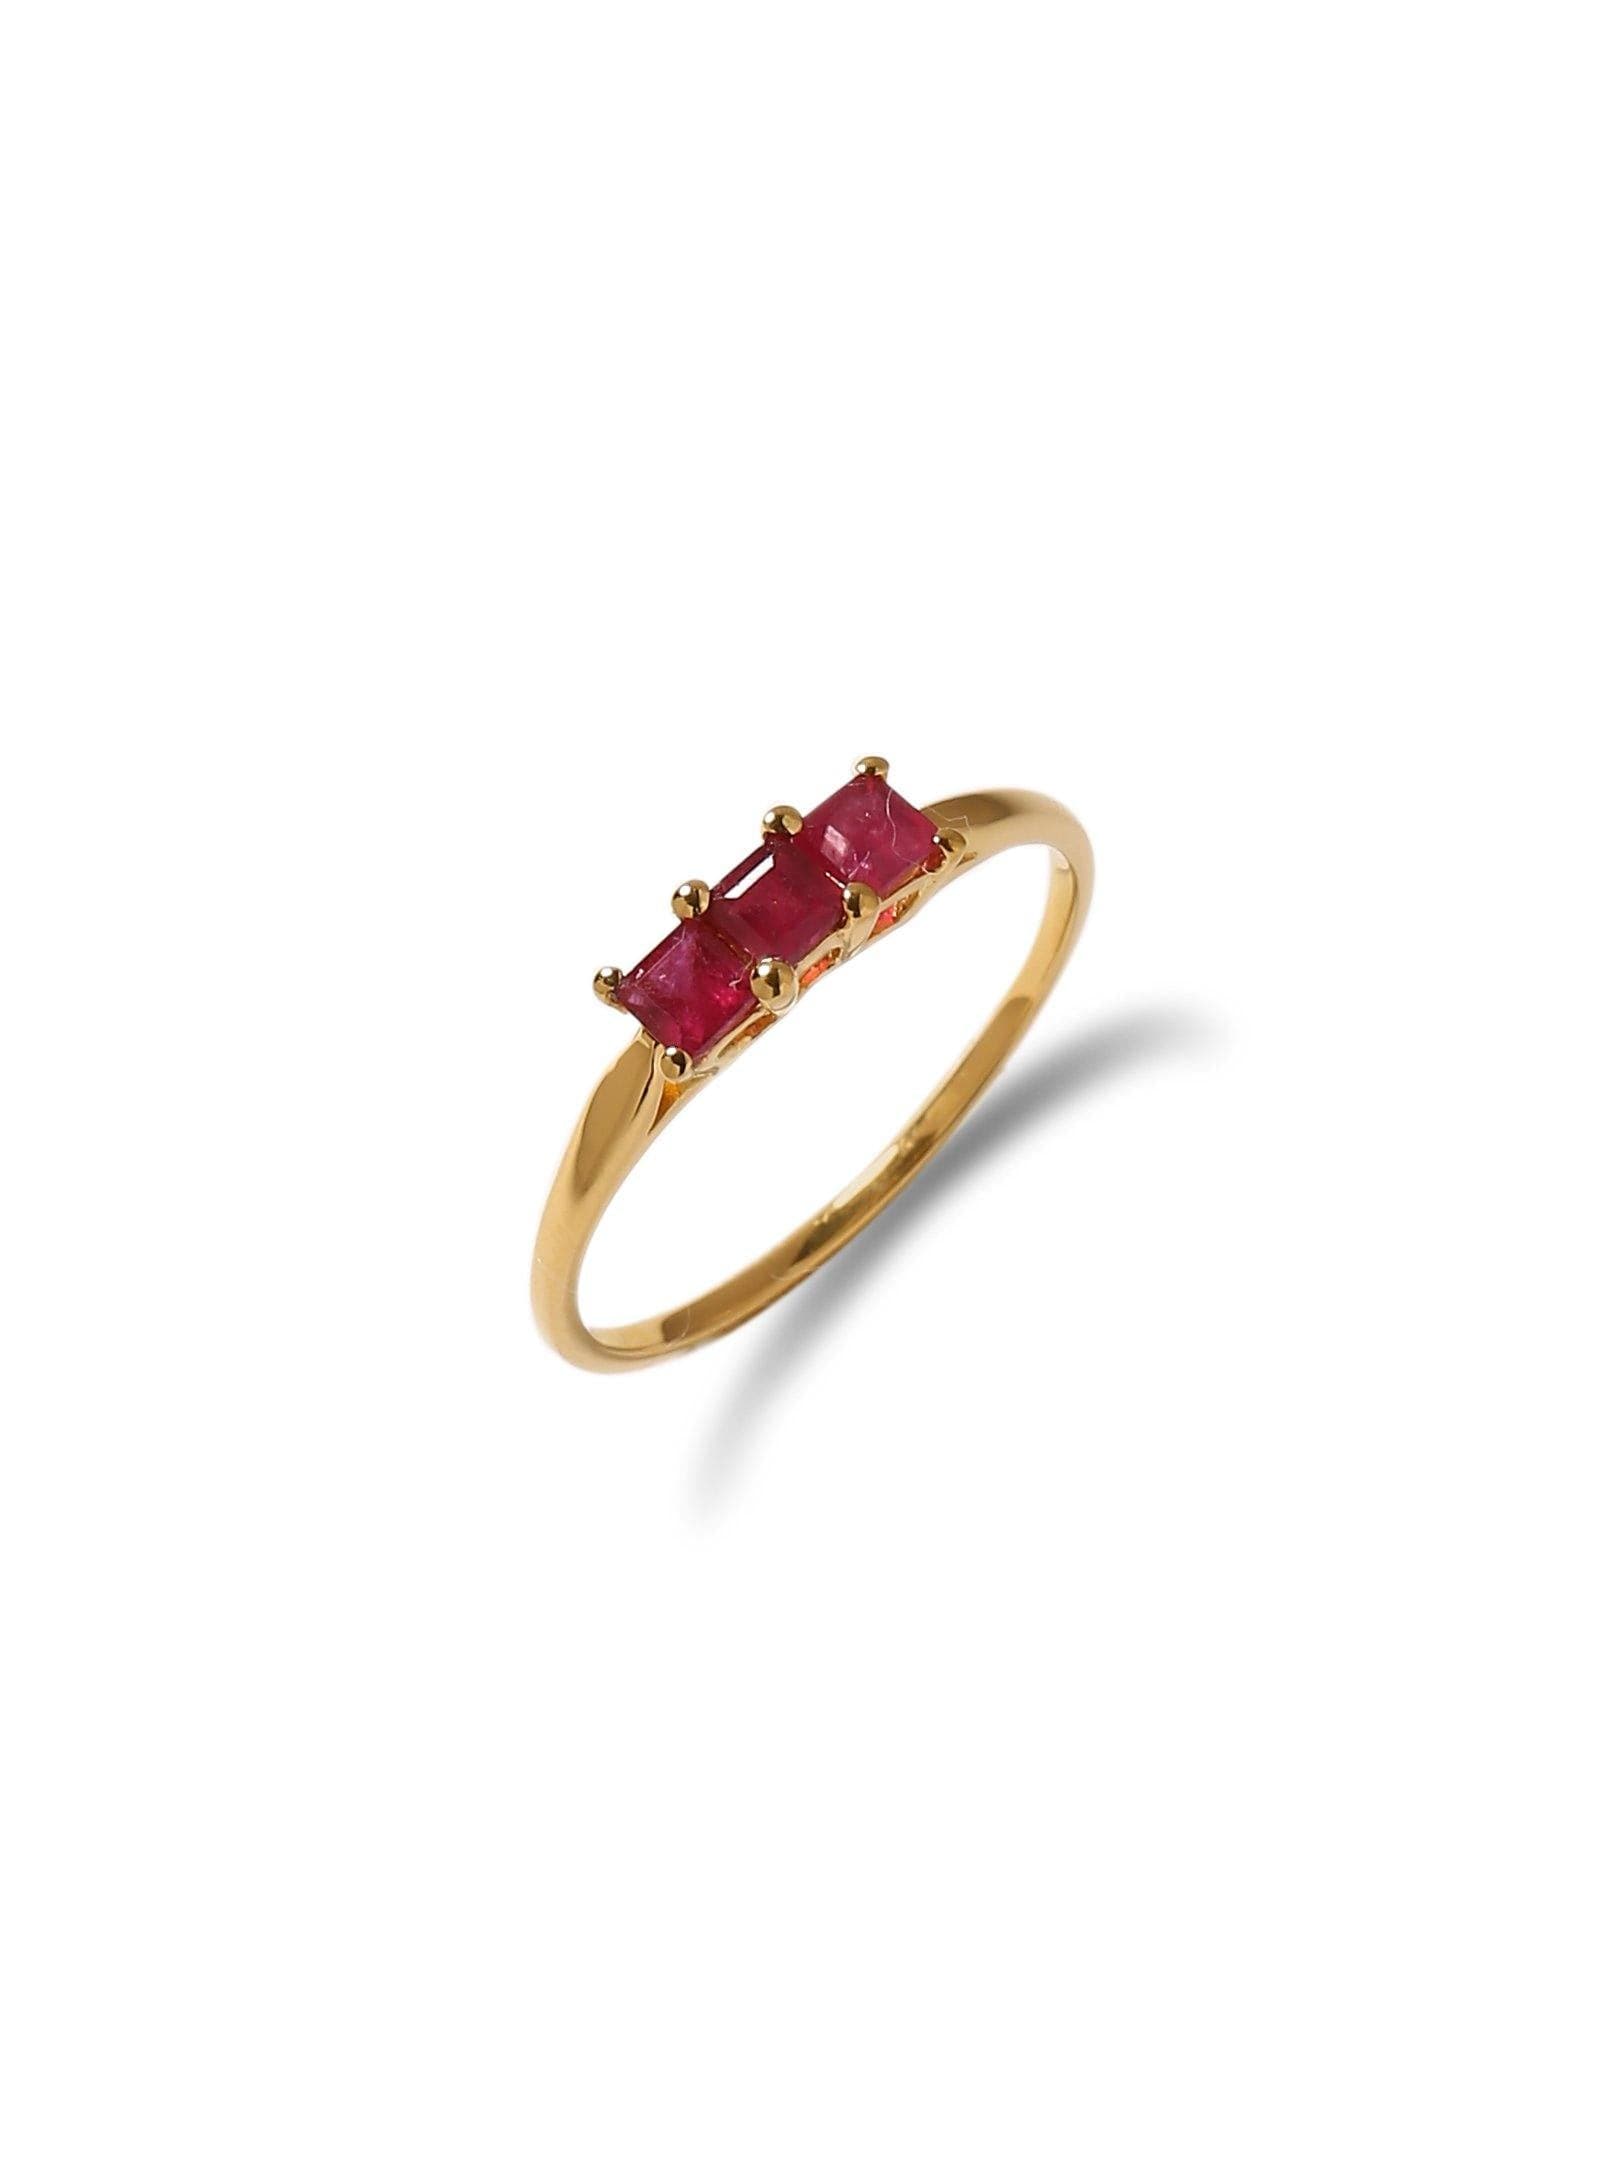 0.66 Ct. Glass Filled Ruby Solid 10k Yellow Gold Band Ring Jewelry - YoTreasure